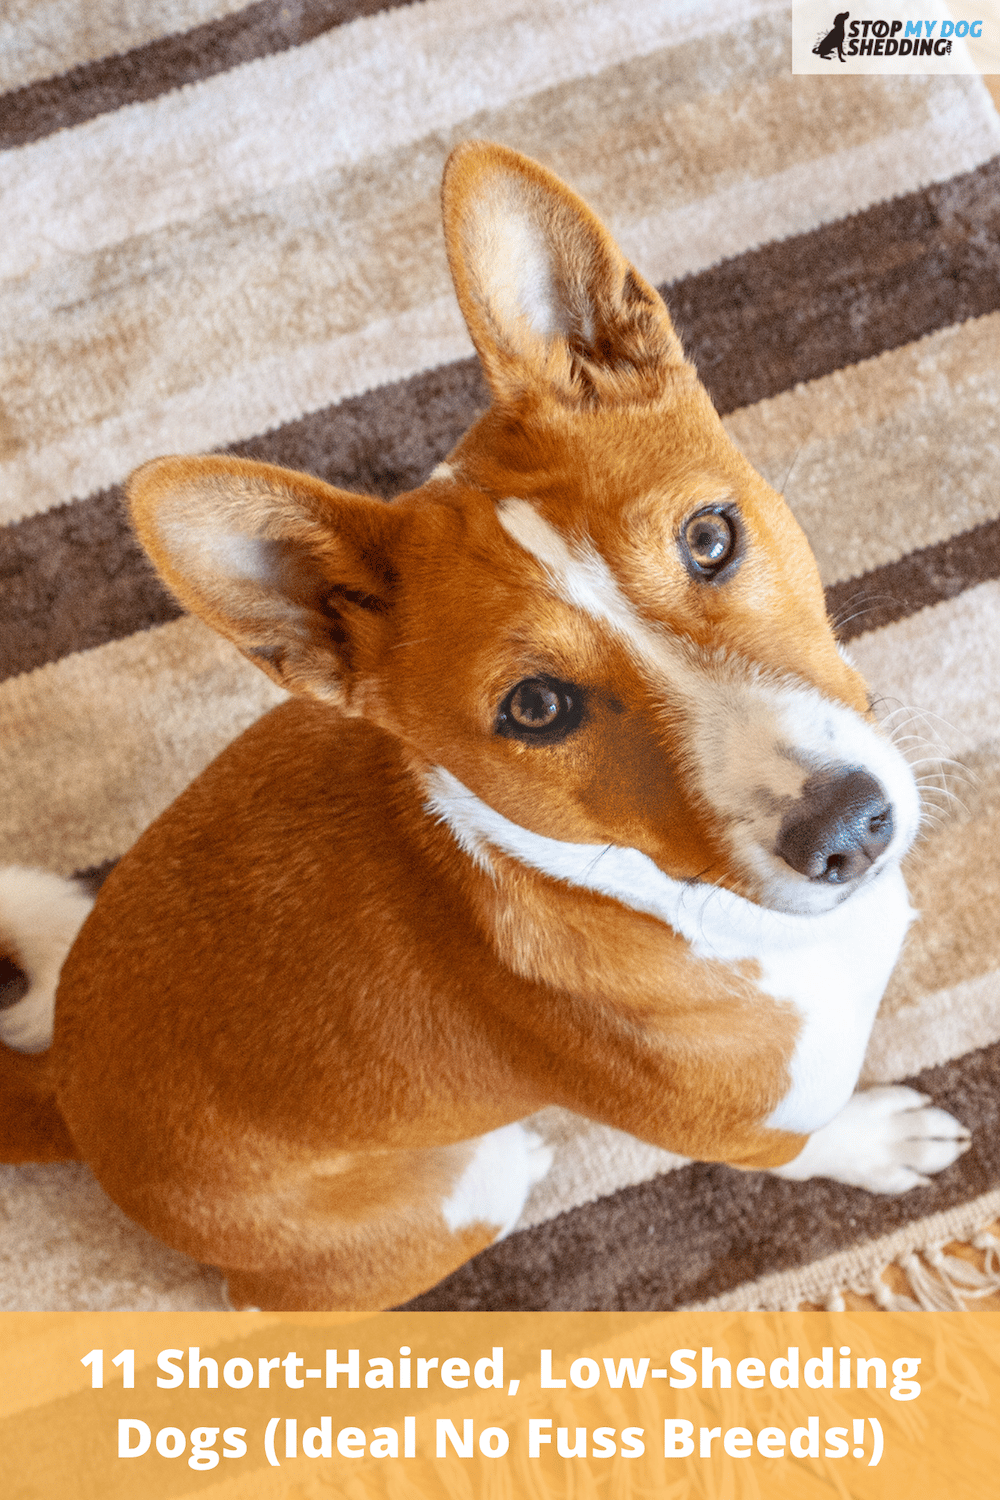 11 Short-Haired, Low-Shedding Dogs (Ideal No Fuss Breeds!)